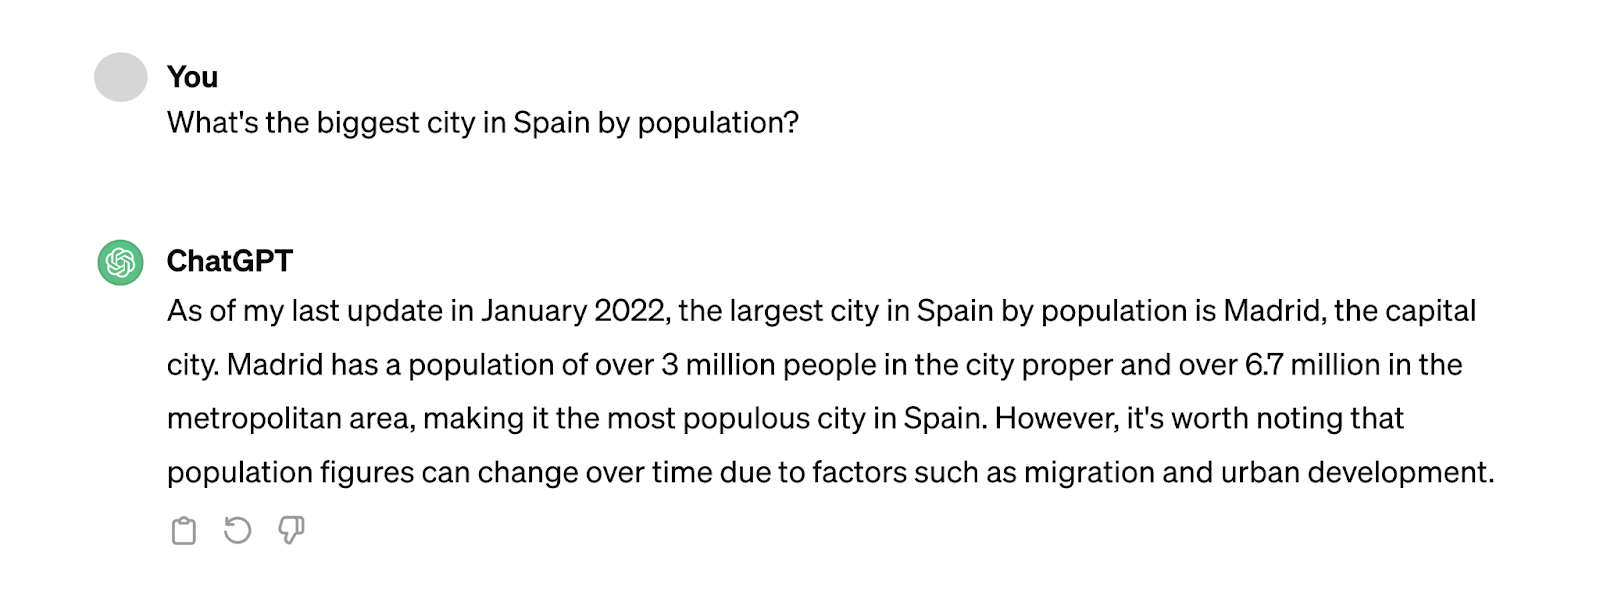 Asking chatgpt "what's the biggest city in spain by population?" and the reply is "as of my last update in January 2022, the largest city in spain by population is Madrid..."